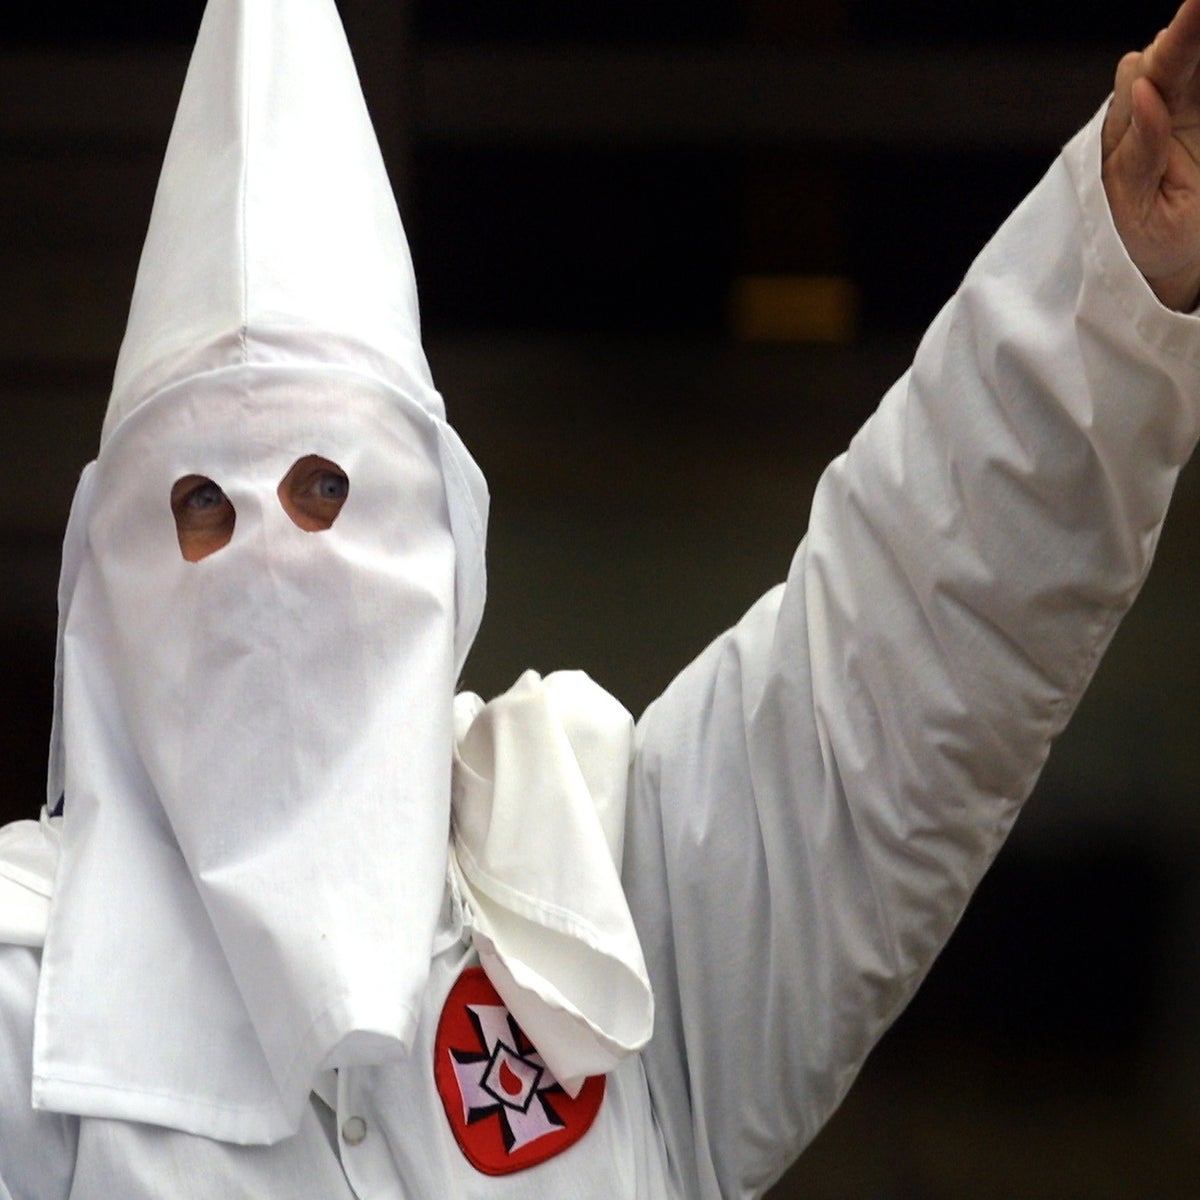 KKK costumes spotted at carnival in Switzerland prompt investigation: 'That  is definitely taking it too far', The Independent